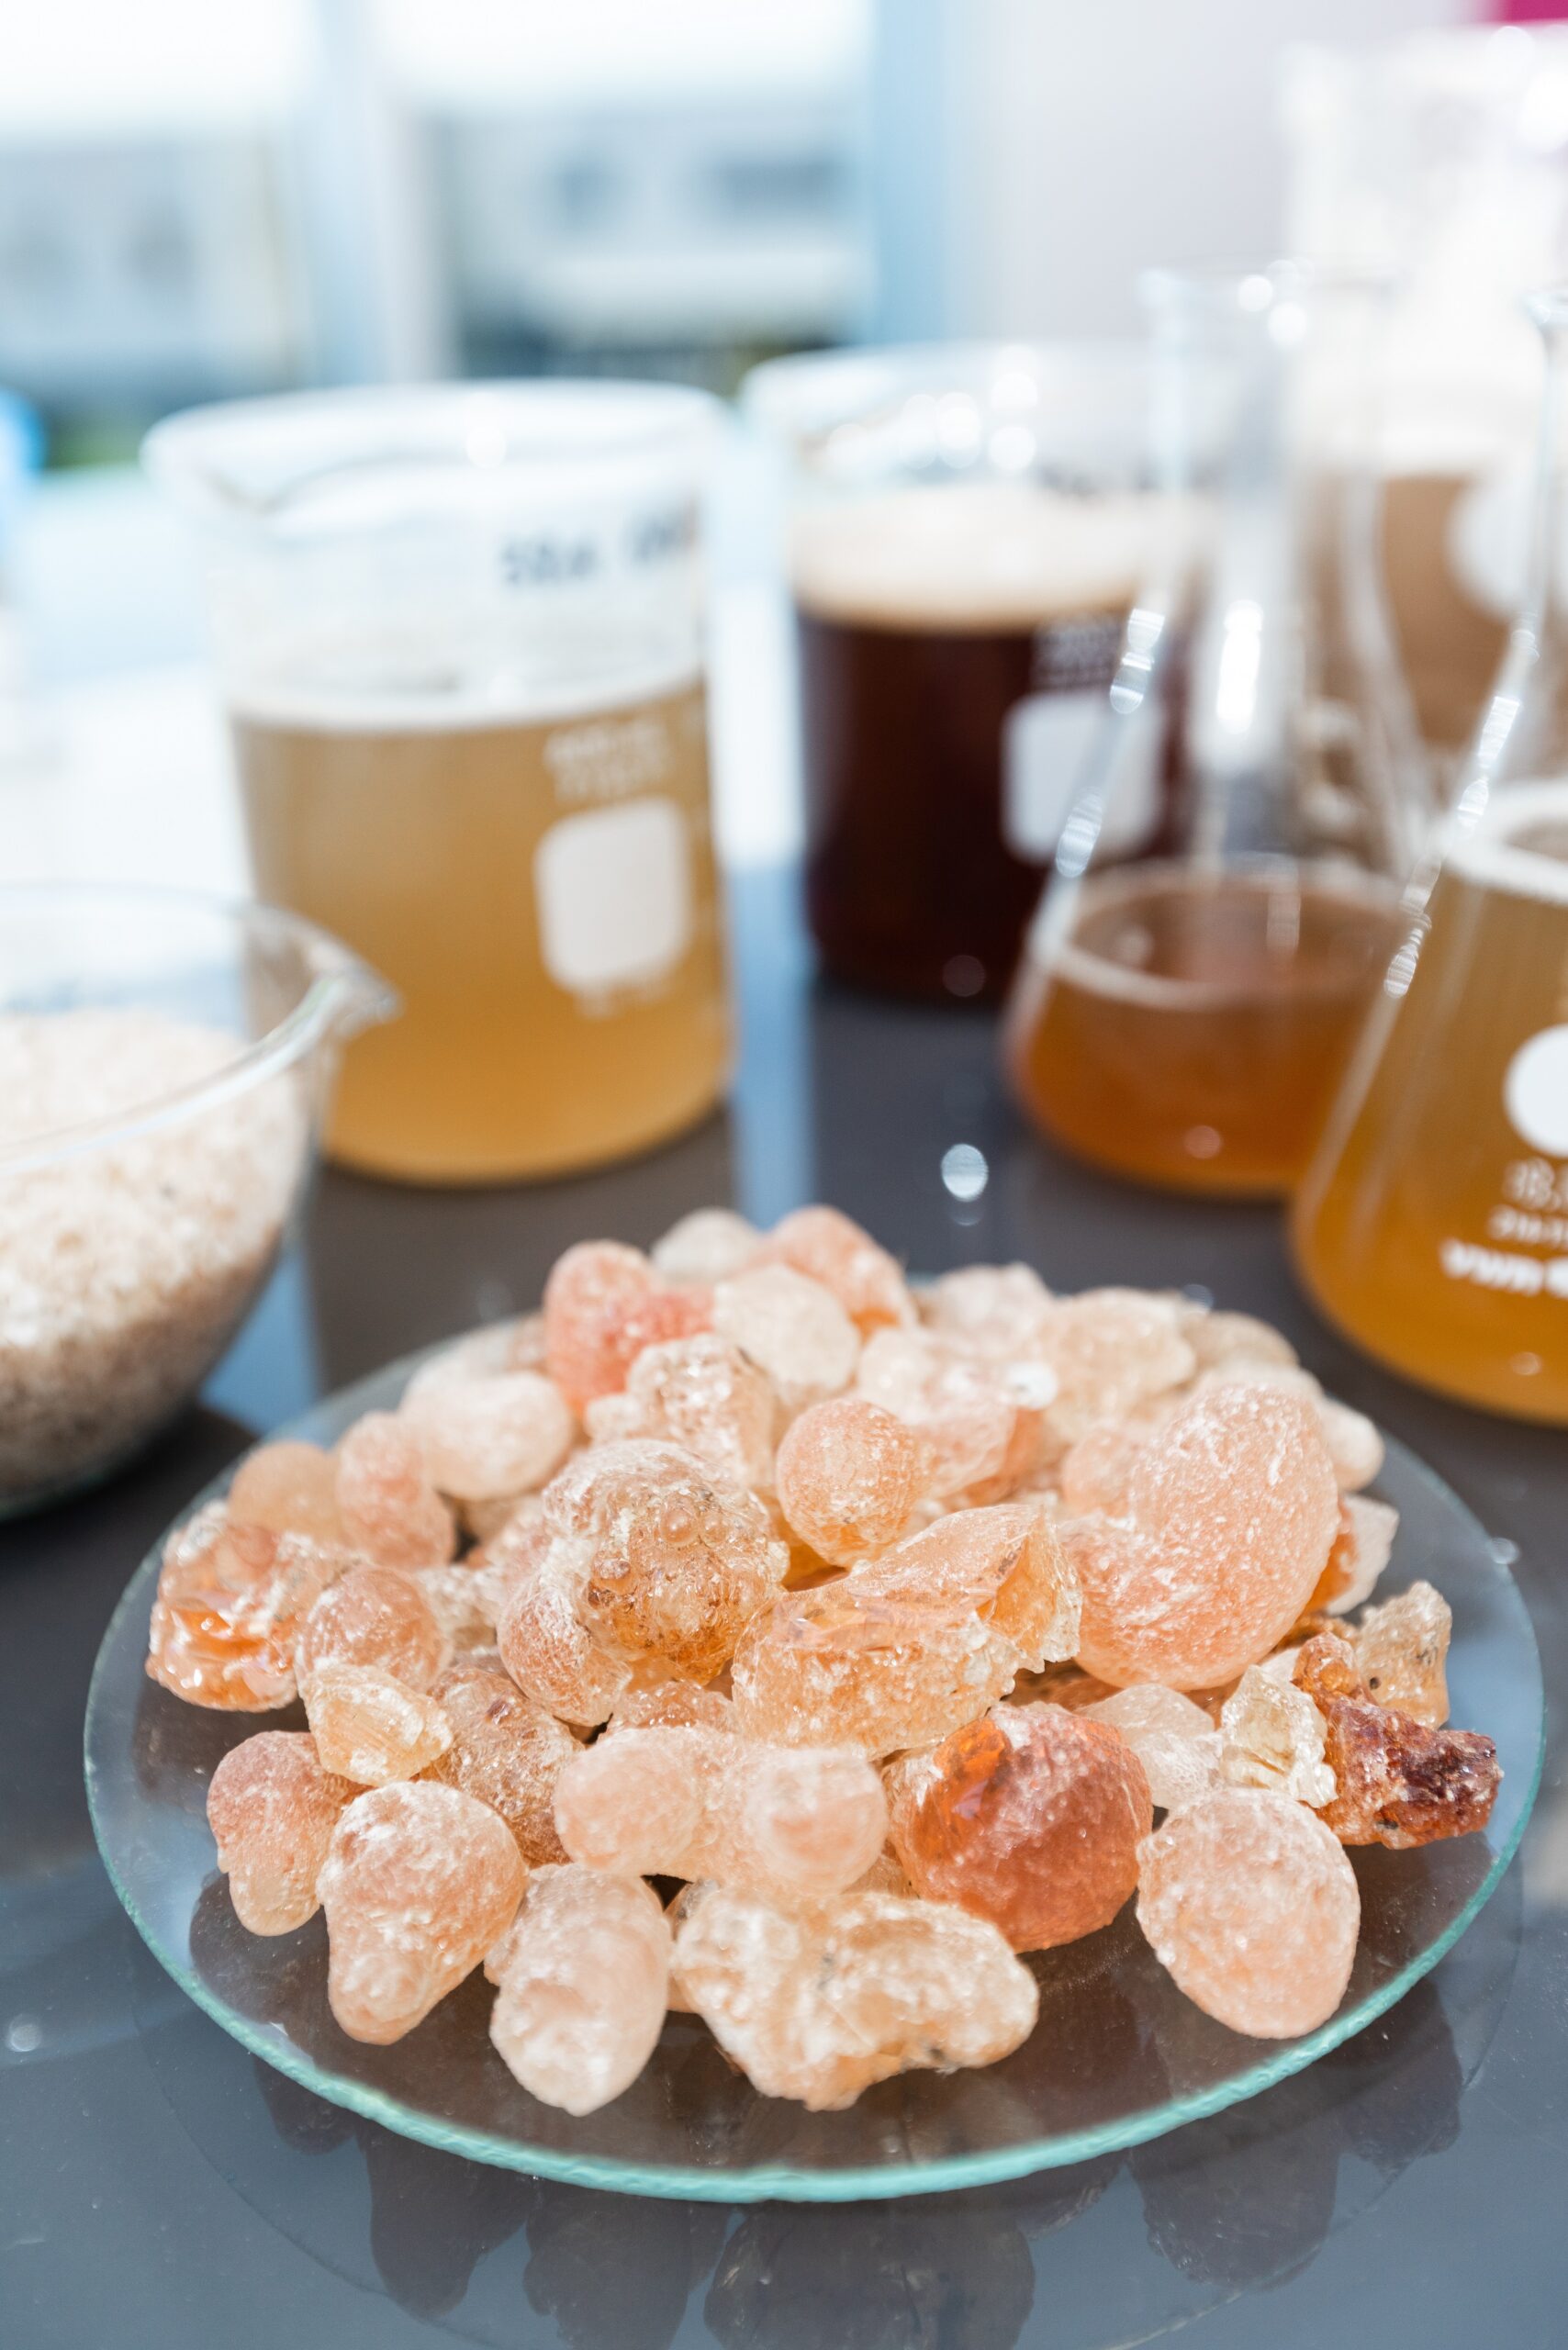 New data shows acacia gum should be classified as a dietary fiber, firms  tell FDA in new petition